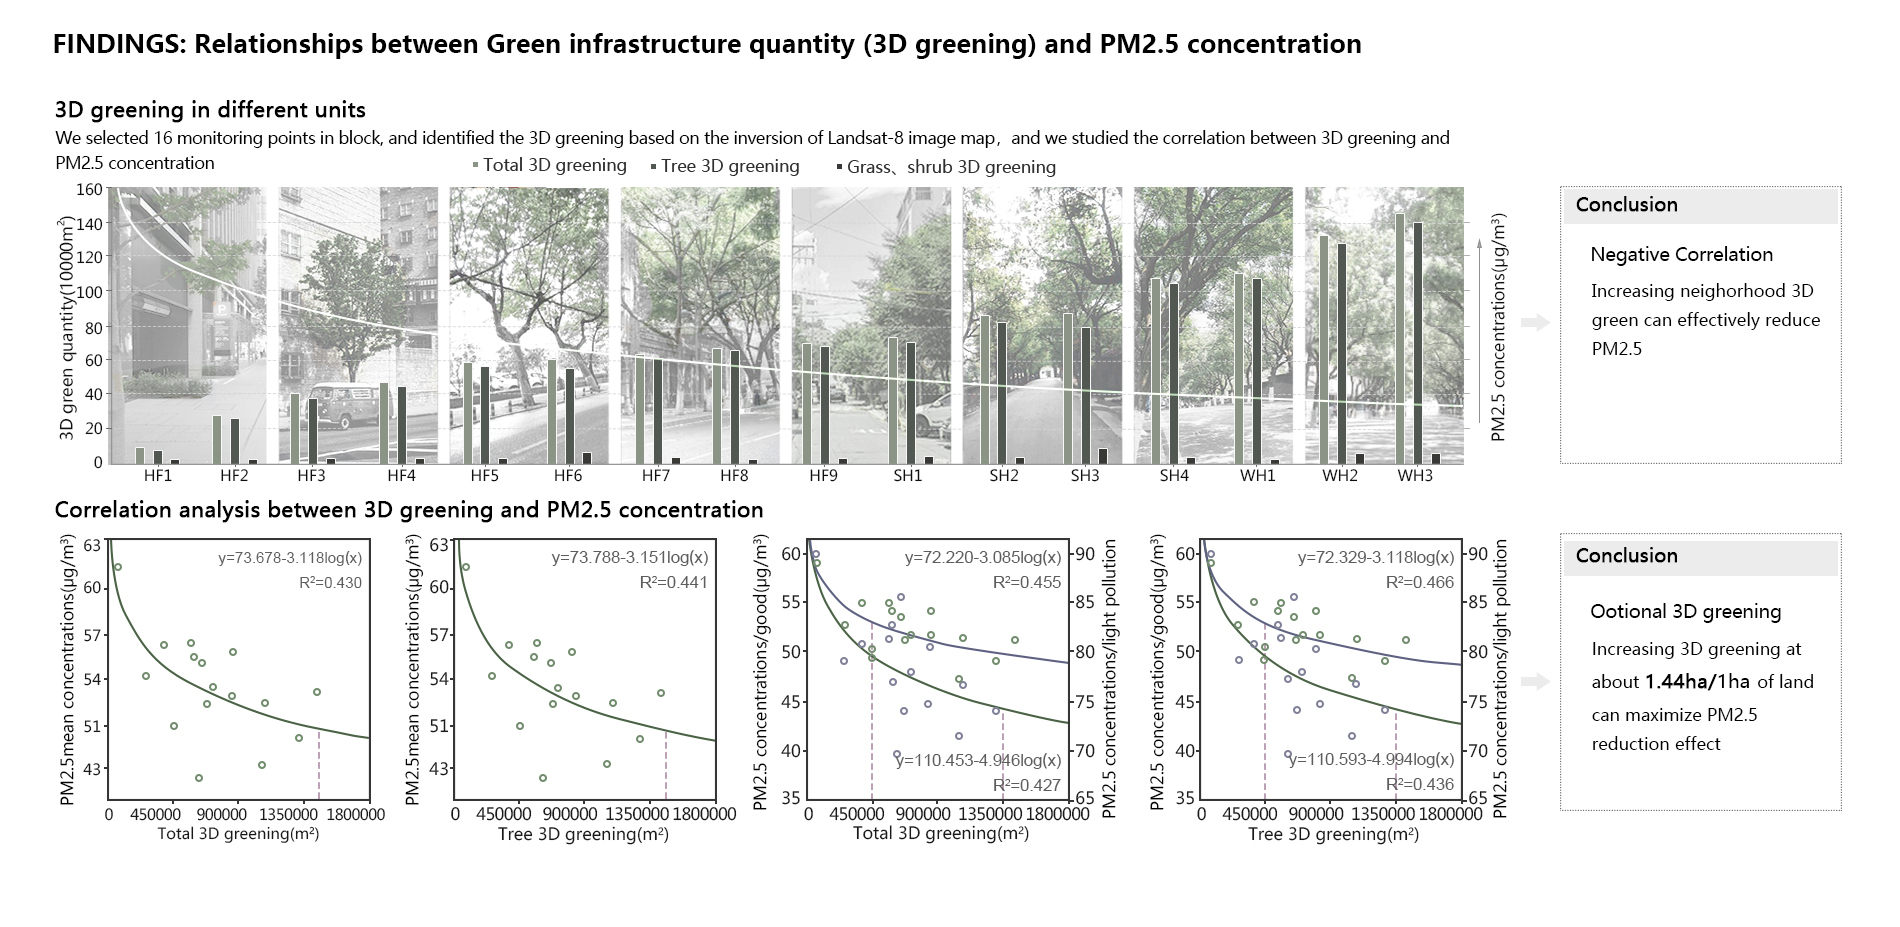 Findings: Relationships between green infrastructure quantity (3D greening) and PM2.5 concentration